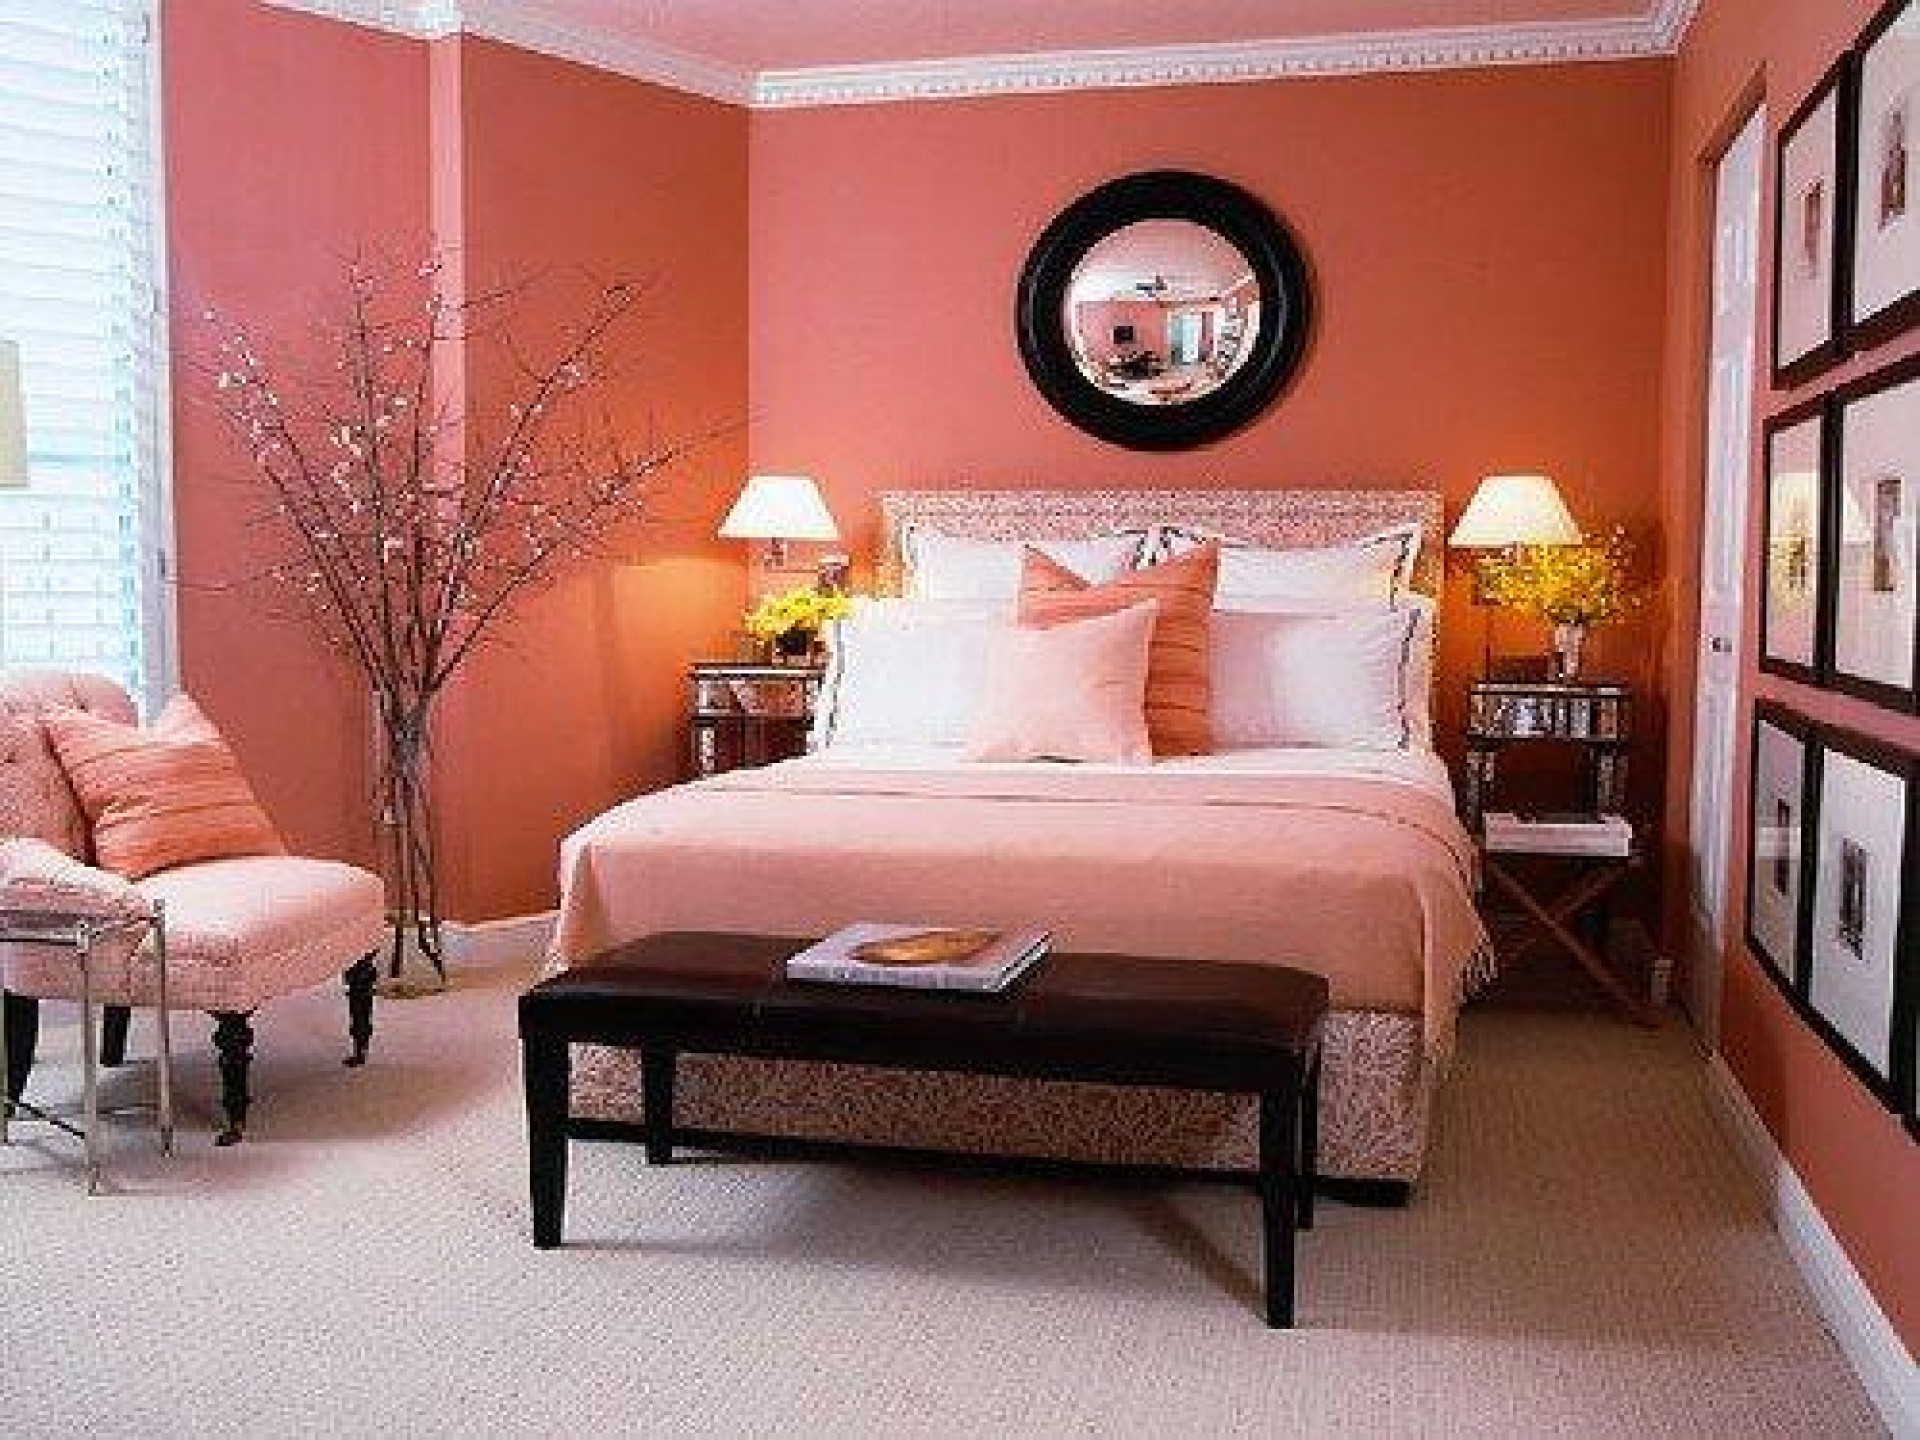 Cute Bedroom Decor
 25 Beautiful Bedroom Ideas For Your Home – The WoW Style